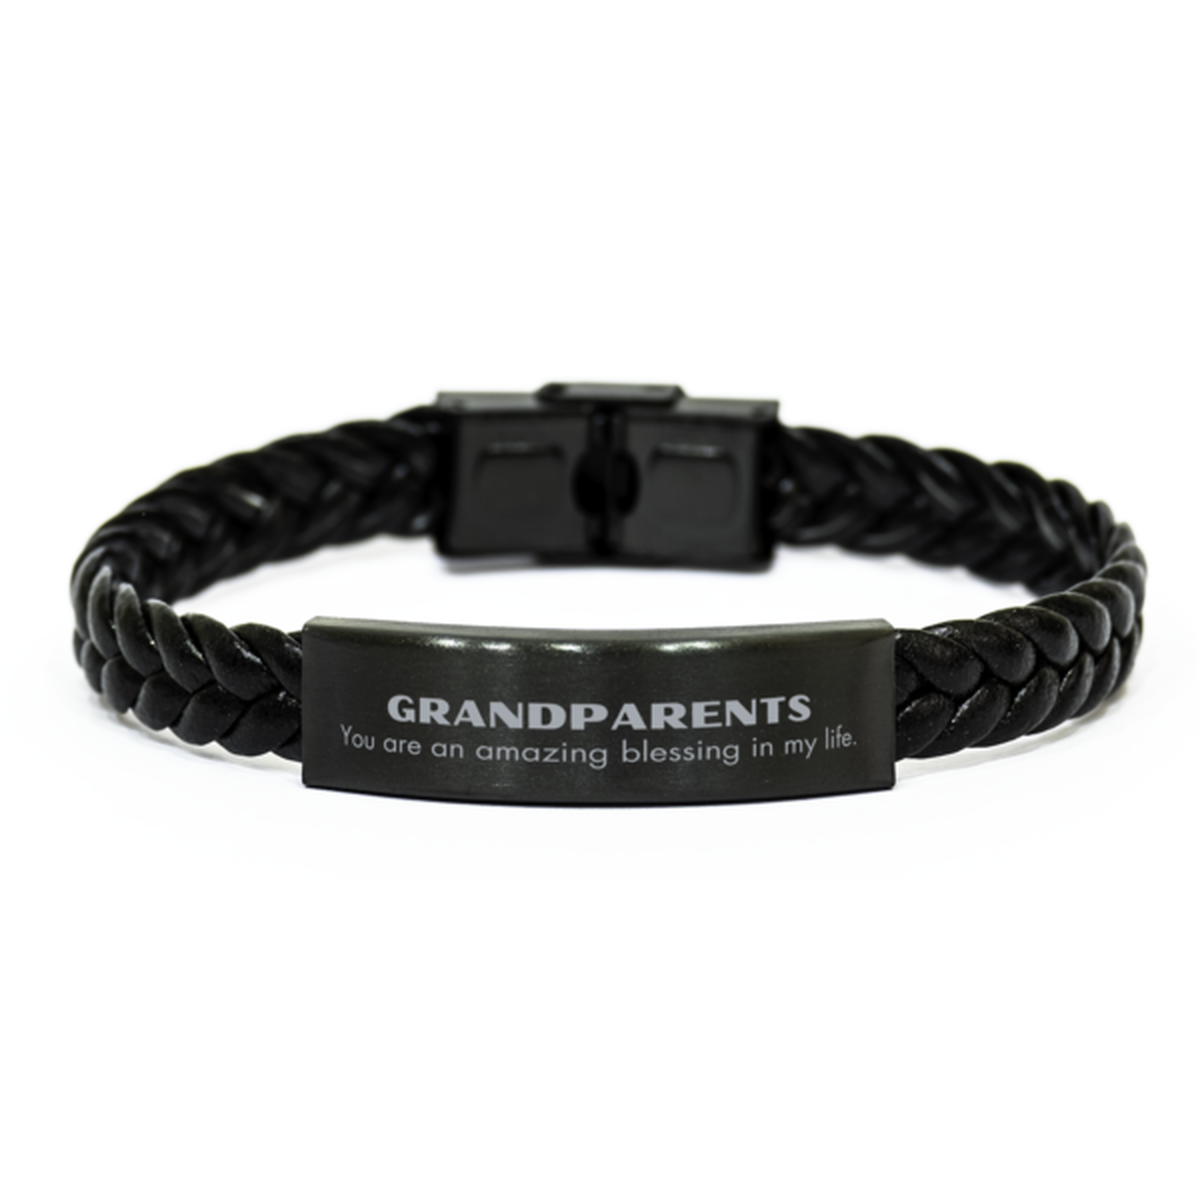 Grandparents Braided Leather Bracelet, You are an amazing blessing in my life, Thank You Gifts For Grandparents, Inspirational Birthday Christmas Unique Gifts For Grandparents